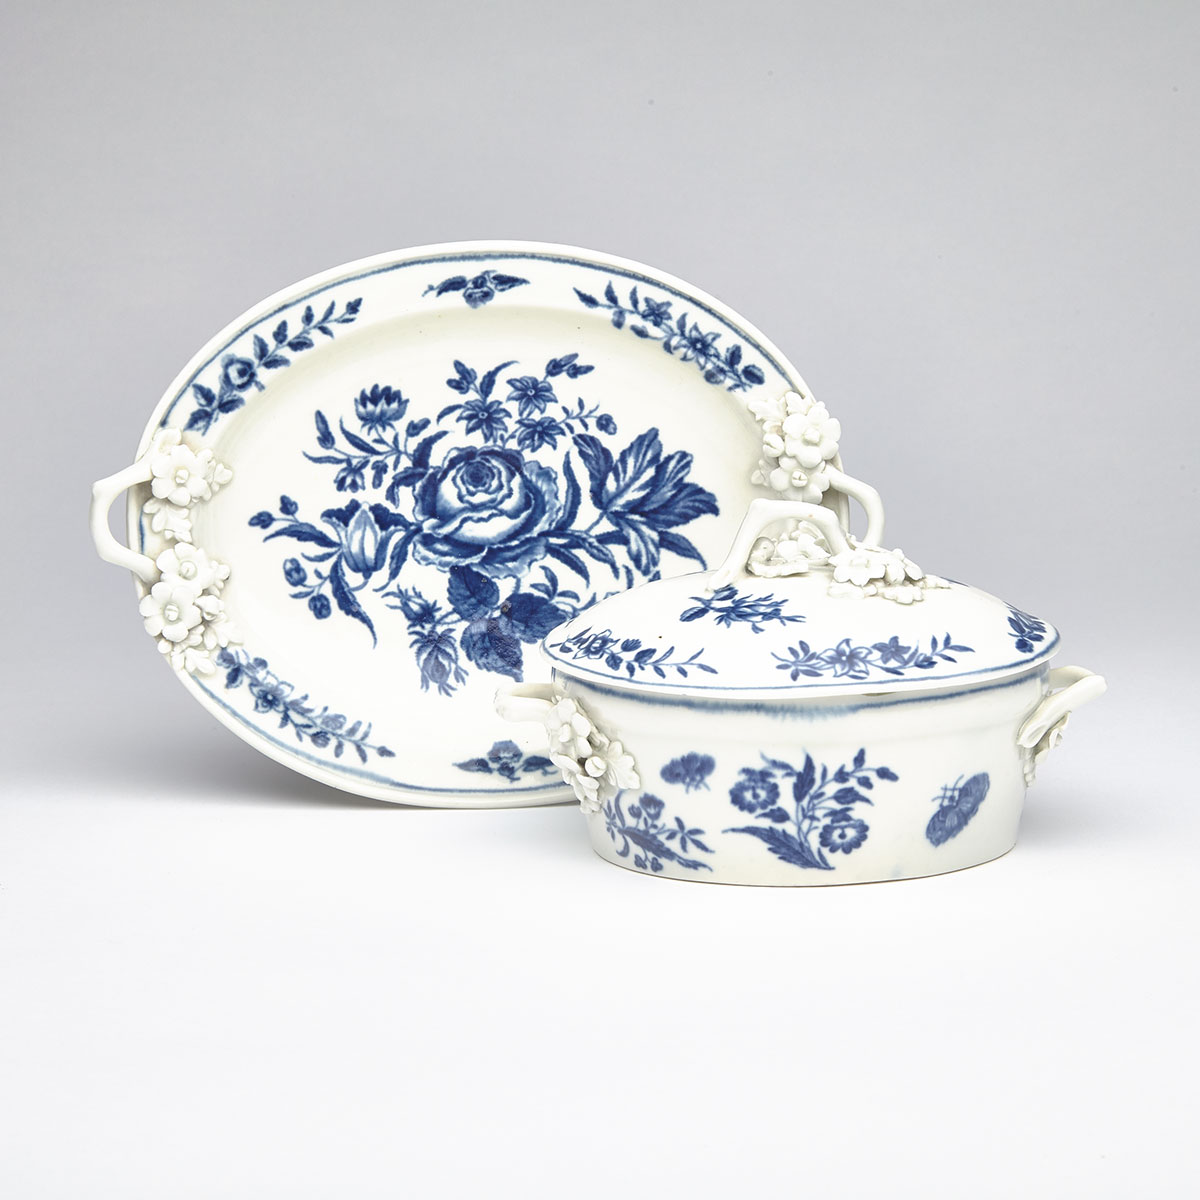 Worcester ‘Rose-Centred Spray’ Oval Butter Tub with Cover and Stand, c.1770